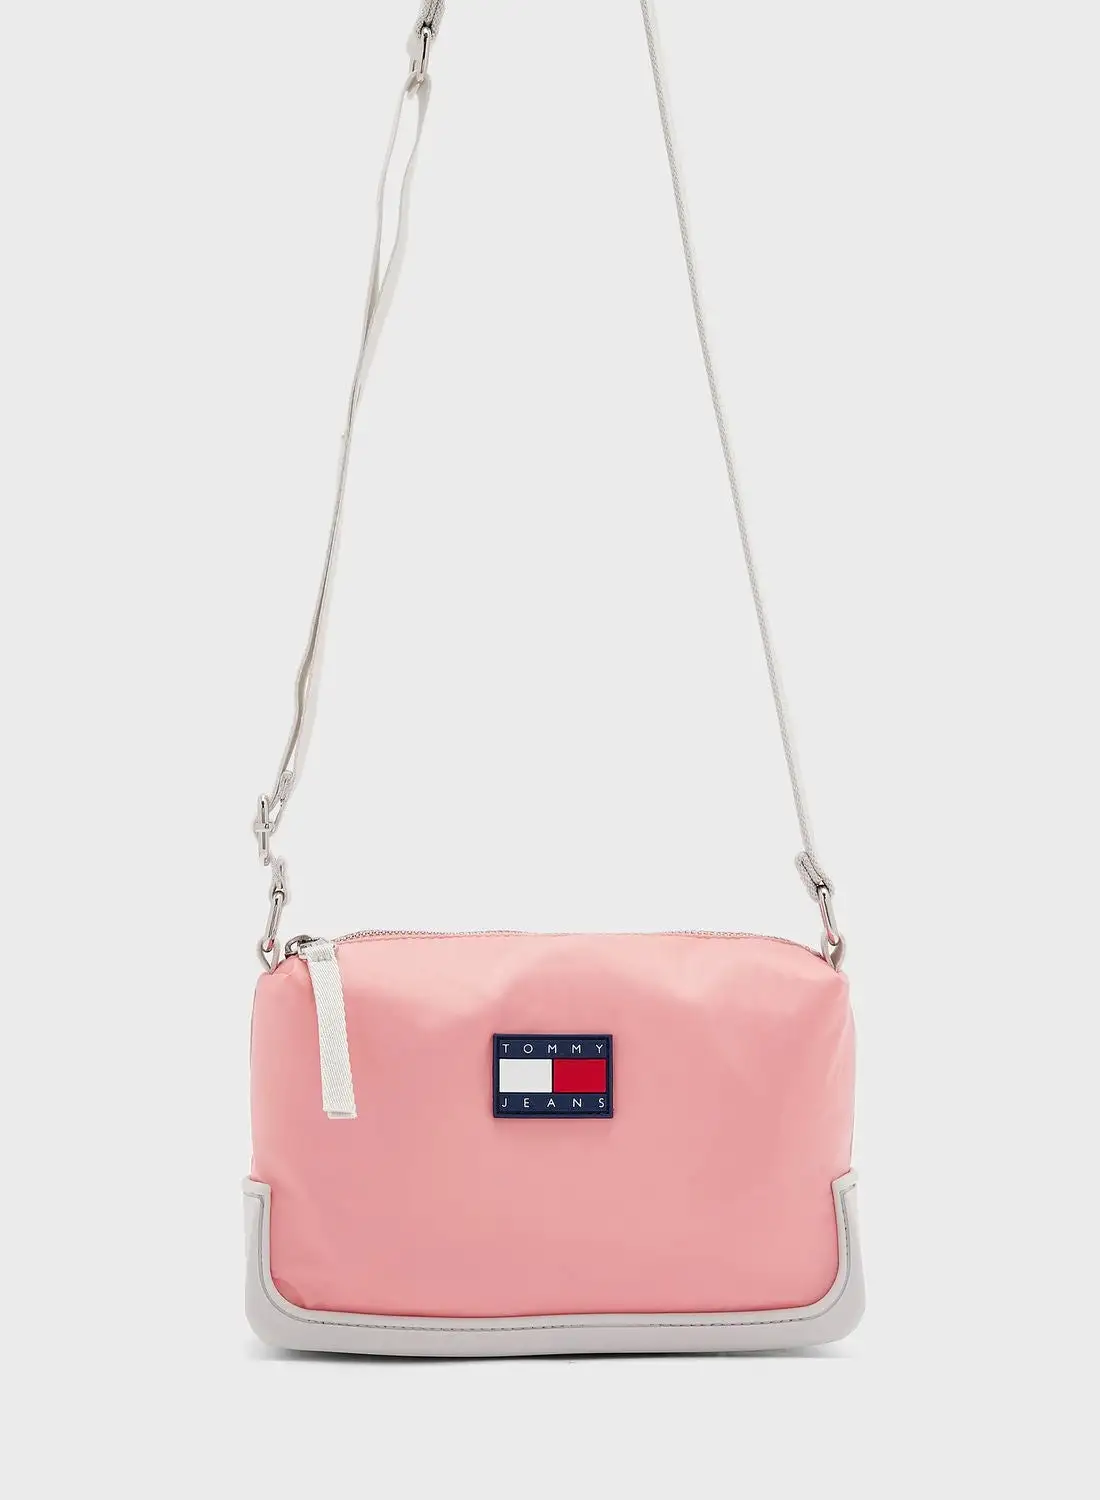 TOMMY HILFIGER Uncovered Clutch